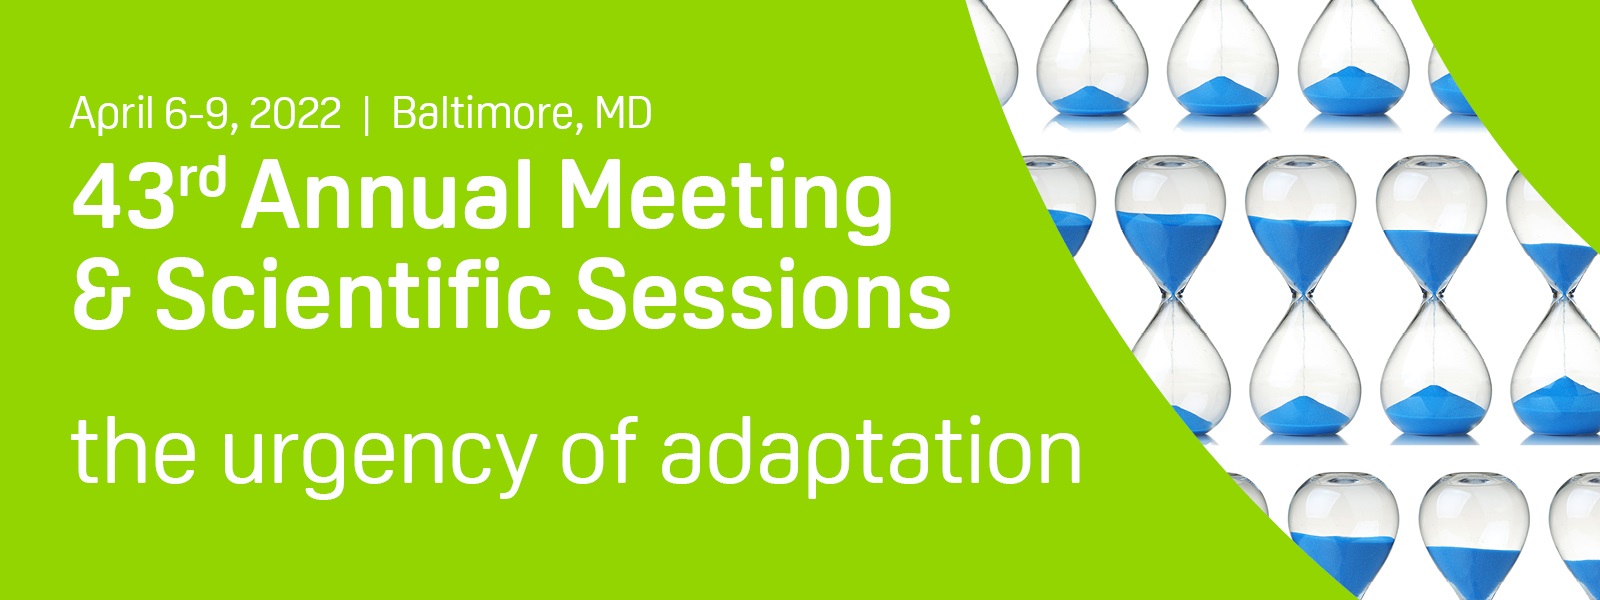 Society of Behavioral Medicine’s 43rd Annual Meeting